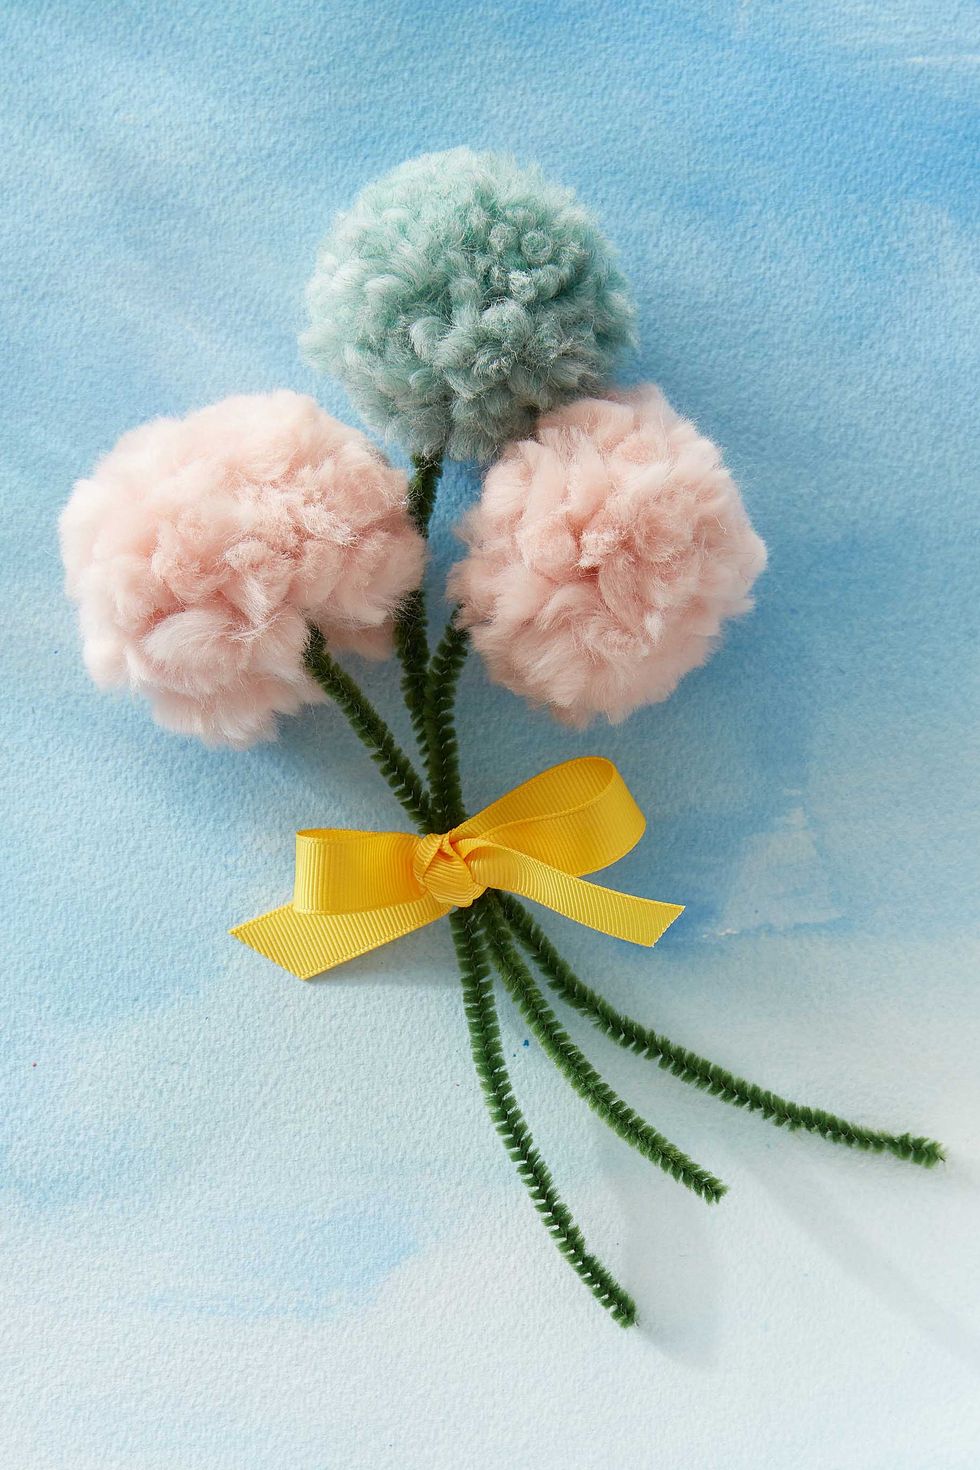 two pink and one pale blue yarn pom poms with green pipe cleaner stems tied into a mothers day bouquet with yellow ribbon